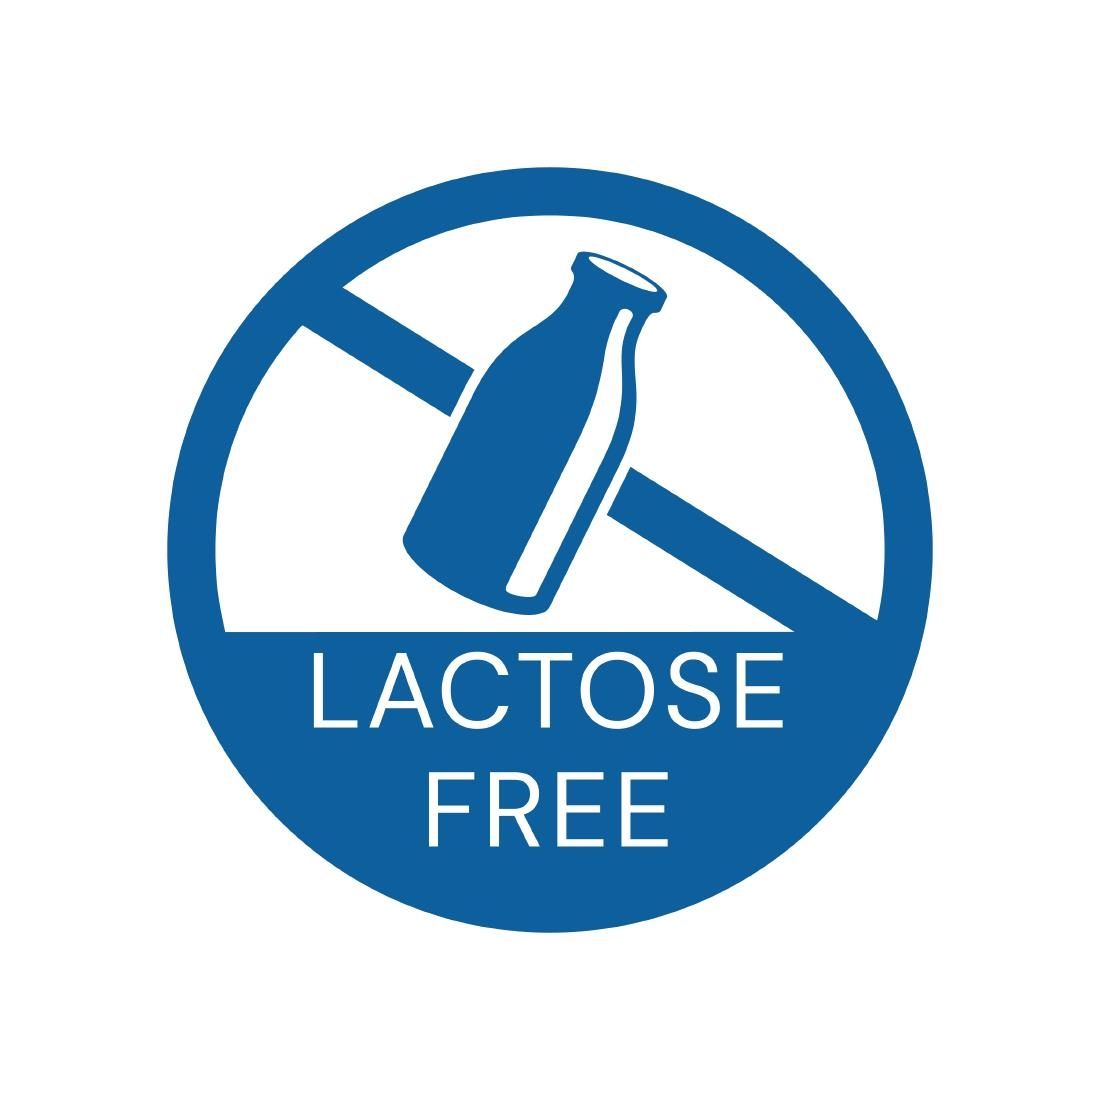 FD435 Vogue Removable Lactose-Free Food Packaging Labels (Pack of 1000) JD Catering Equipment Solutions Ltd